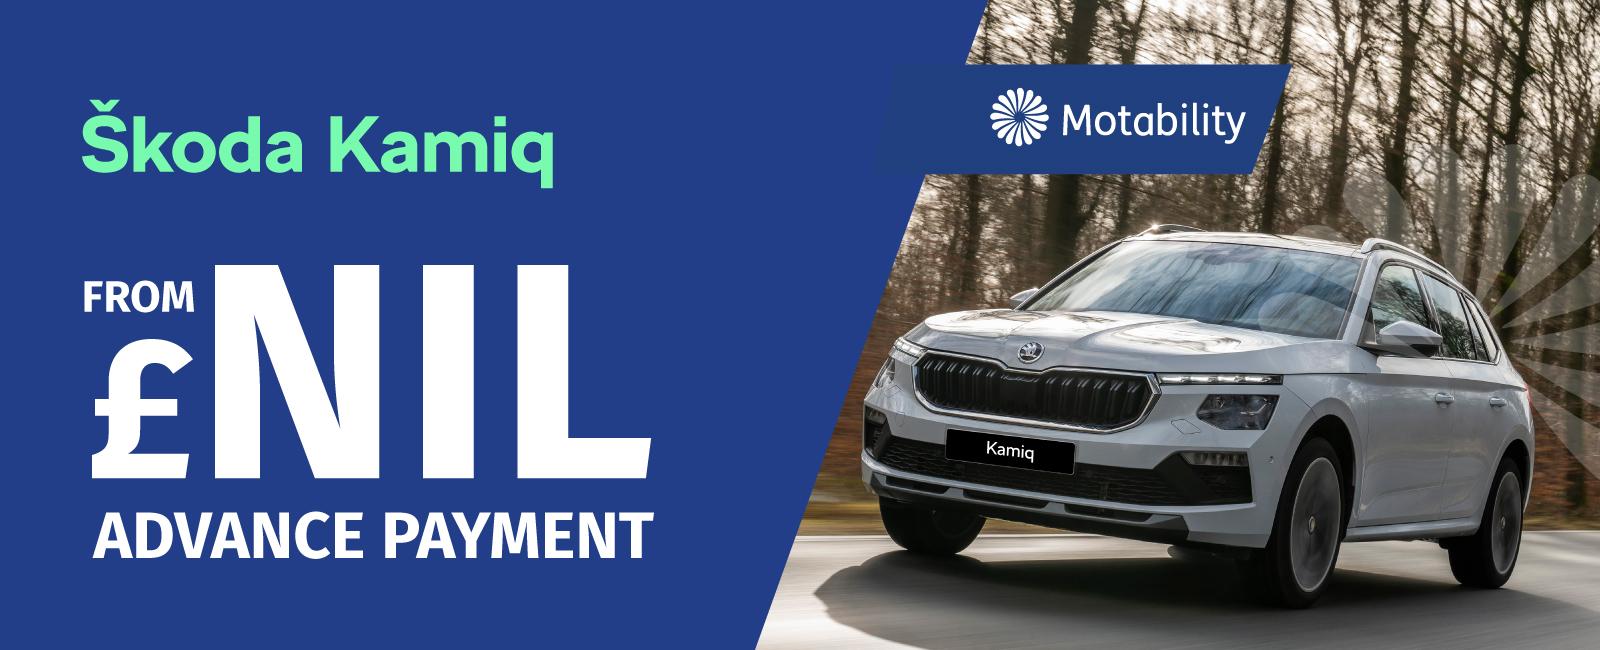 The Skoda Kamiq from £NIL advance payment on the Motability Scheme